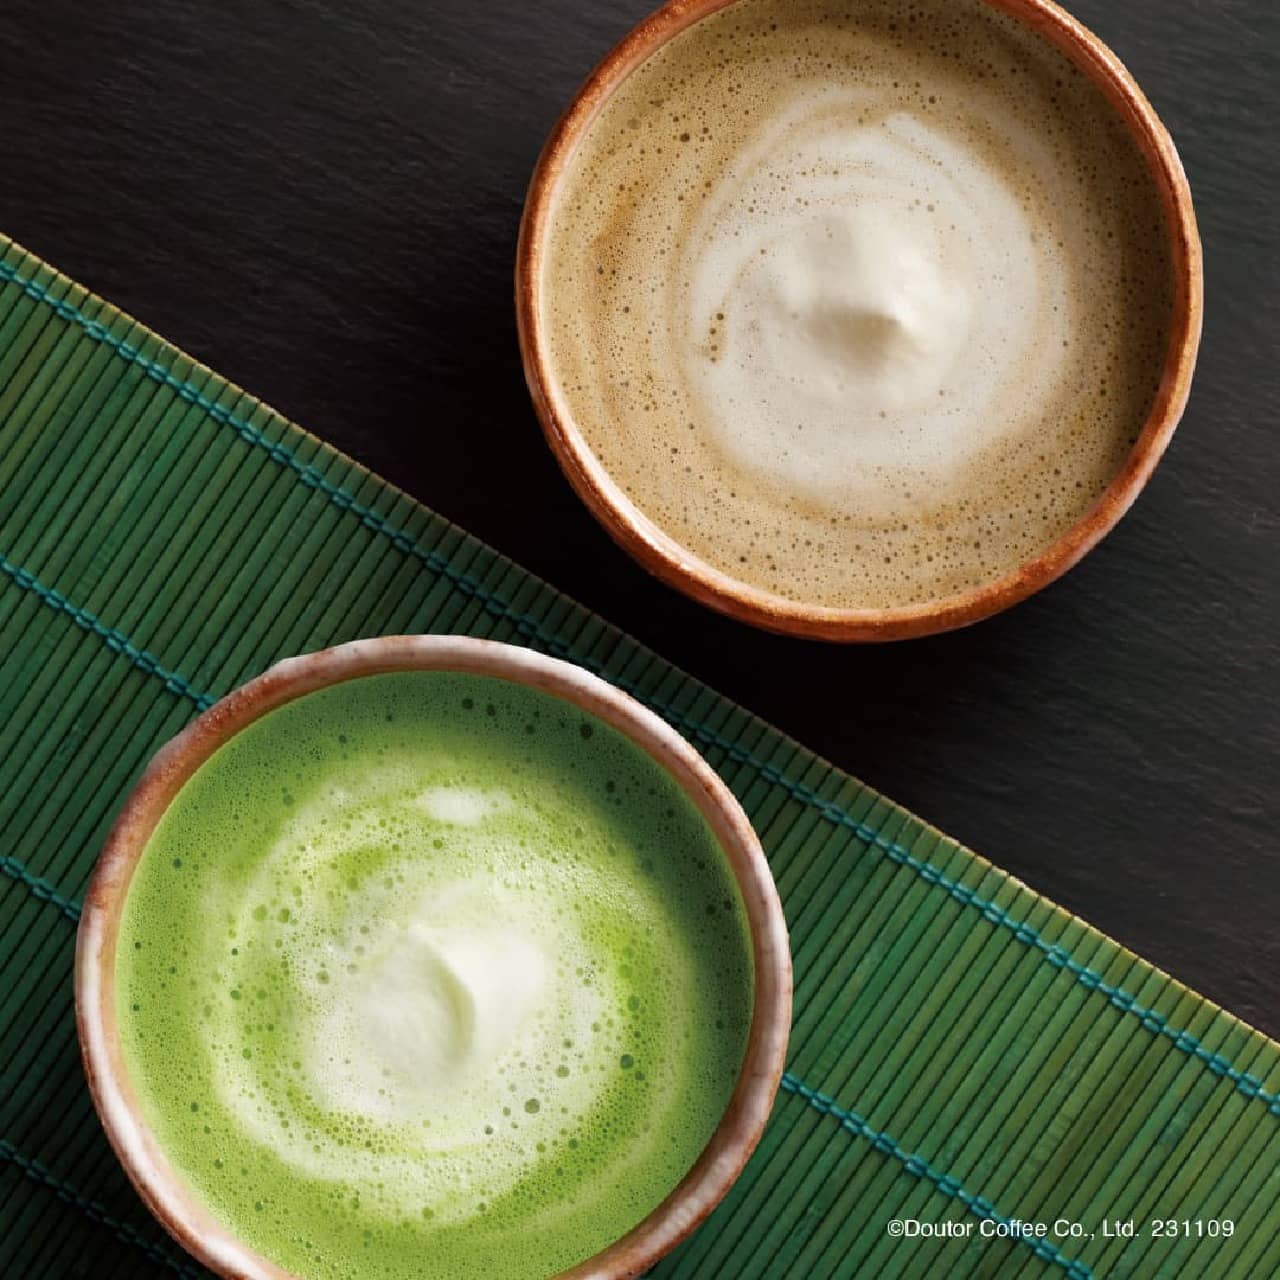 Doutor "Luxurious Hojicha Latte made with Kyoto-produced first-grade green tea / Dark Luxurious Hojicha Latte made with Kyoto-produced first-grade green tea (hot or iced)".